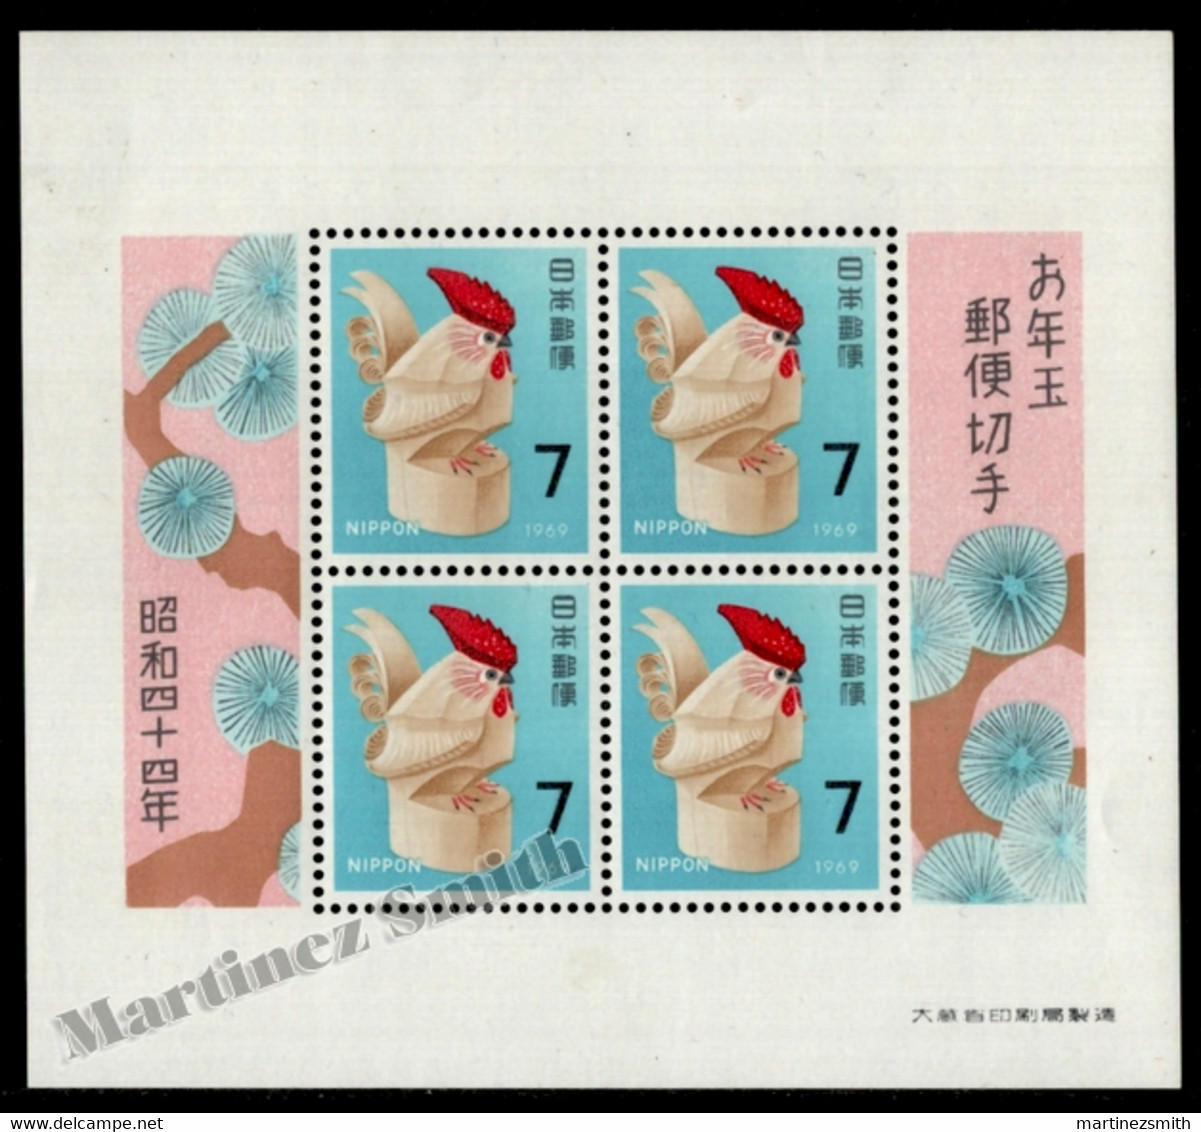 Japon - Japan 1968 Yvert BF 64, New Year, Lunar Year Of The Rooster - Miniature Sheet - MNH - Blocks & Sheetlets